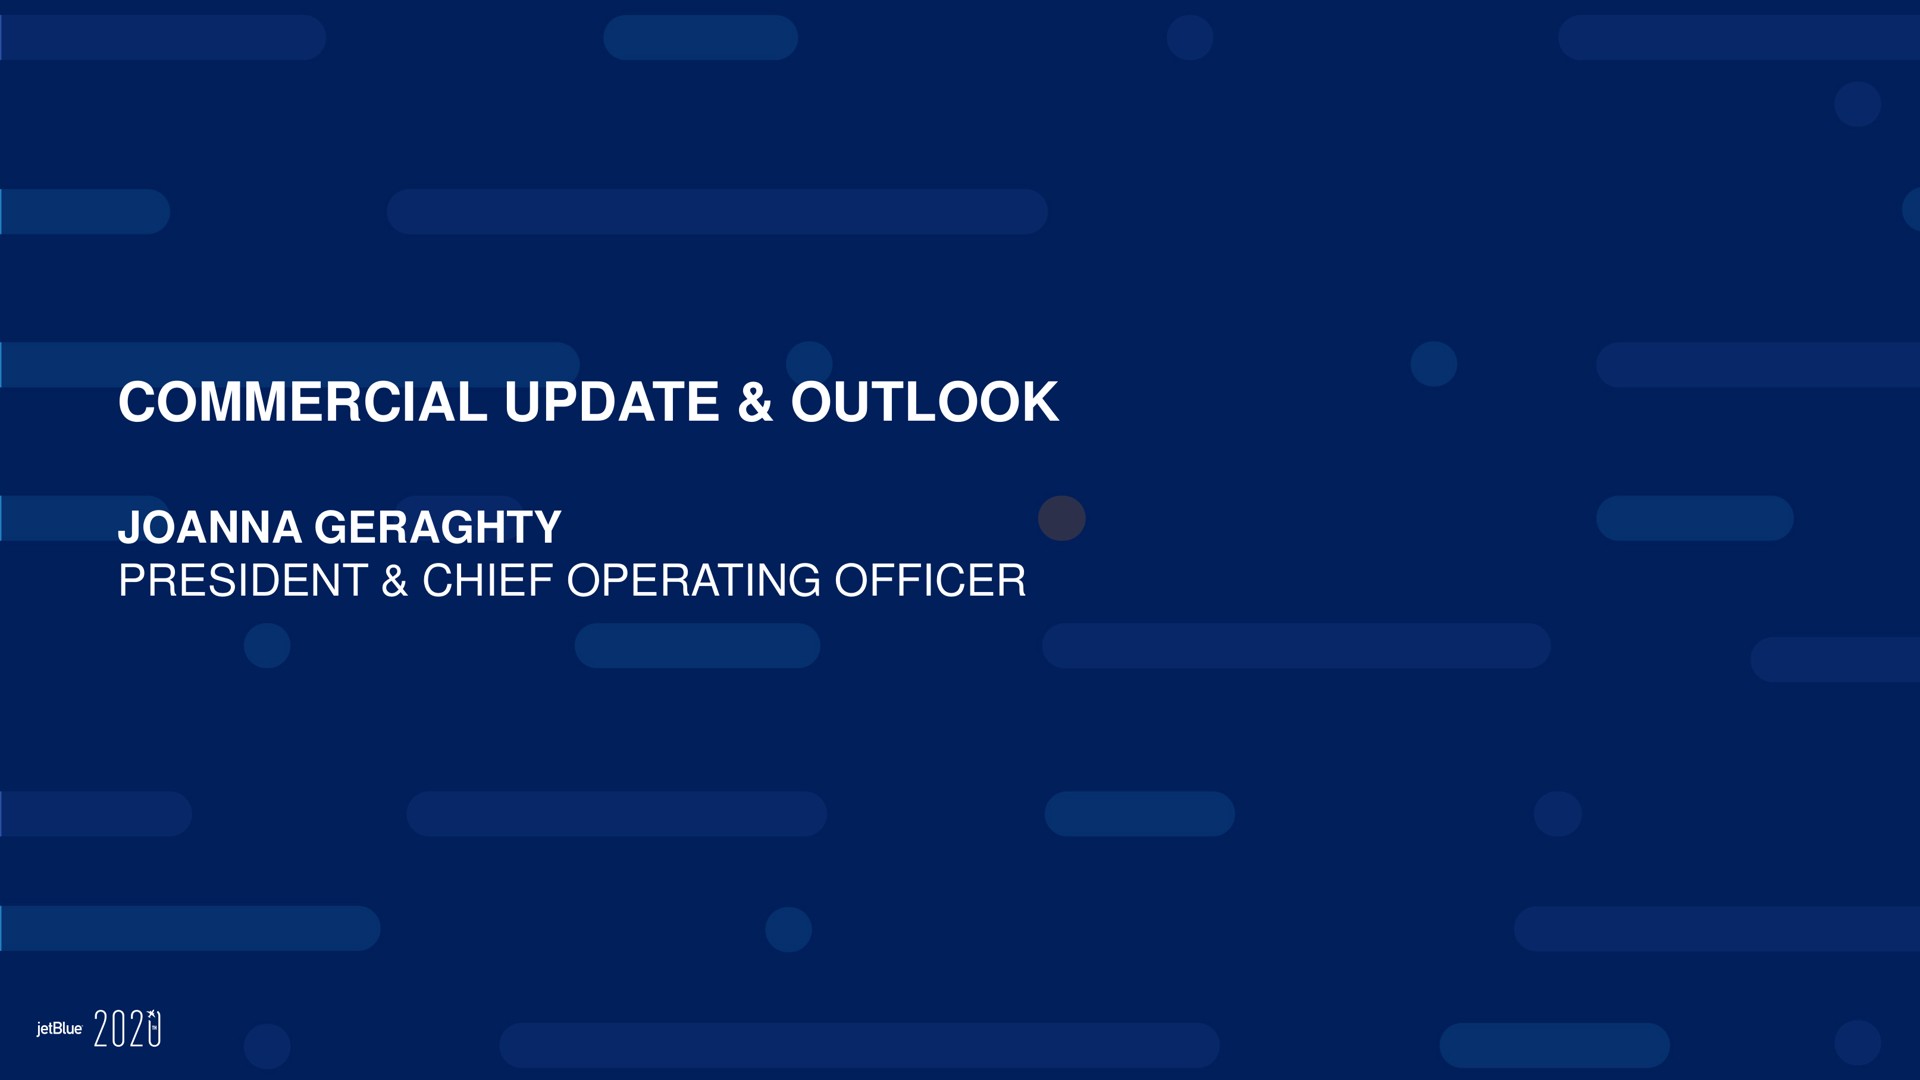 commercial update outlook president chief operating officer | jetBlue